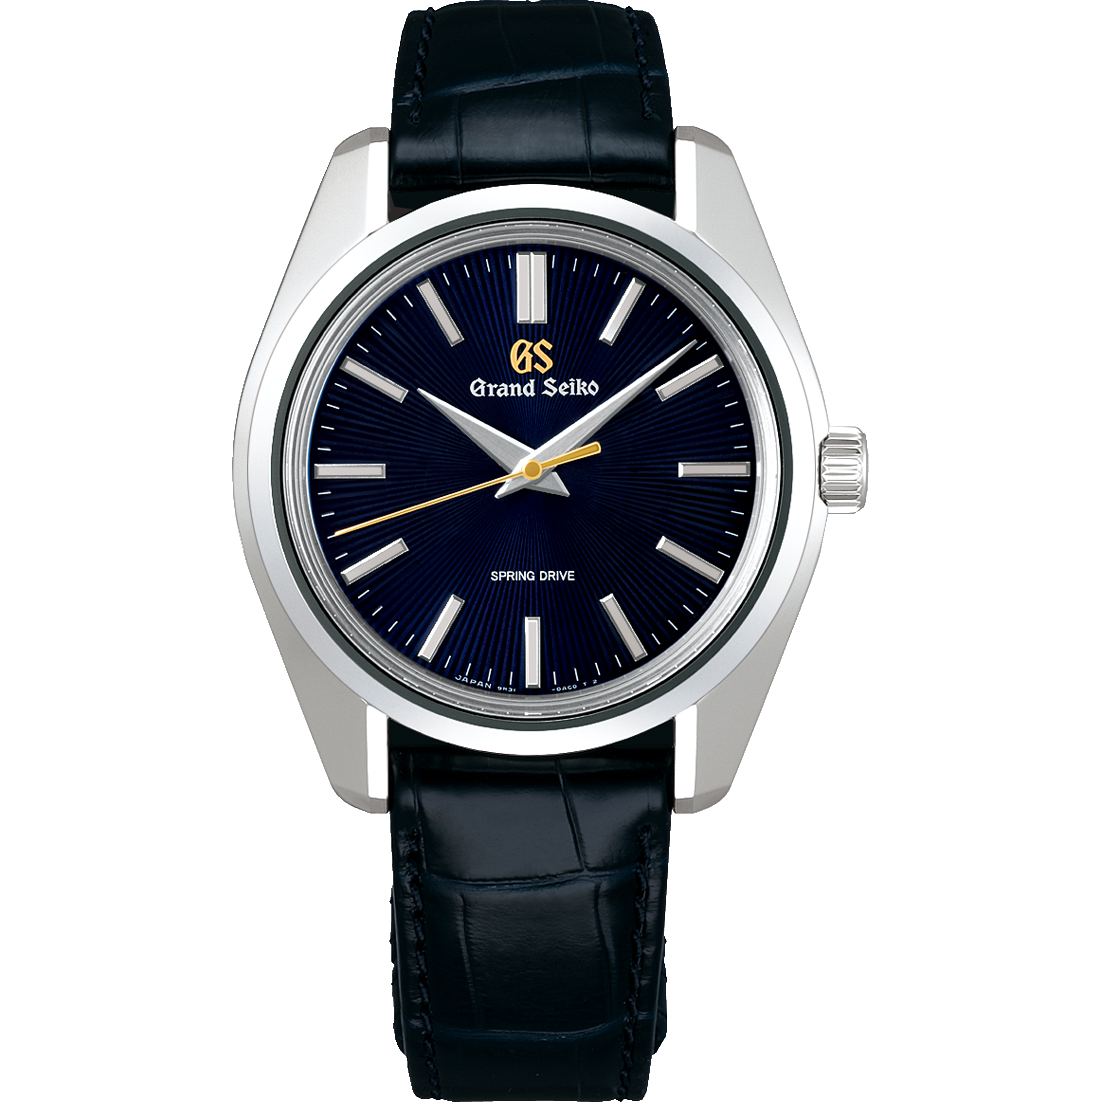 SBGY009 - 55th Anniversary Limited Edition – GRAND SEIKO INDIA